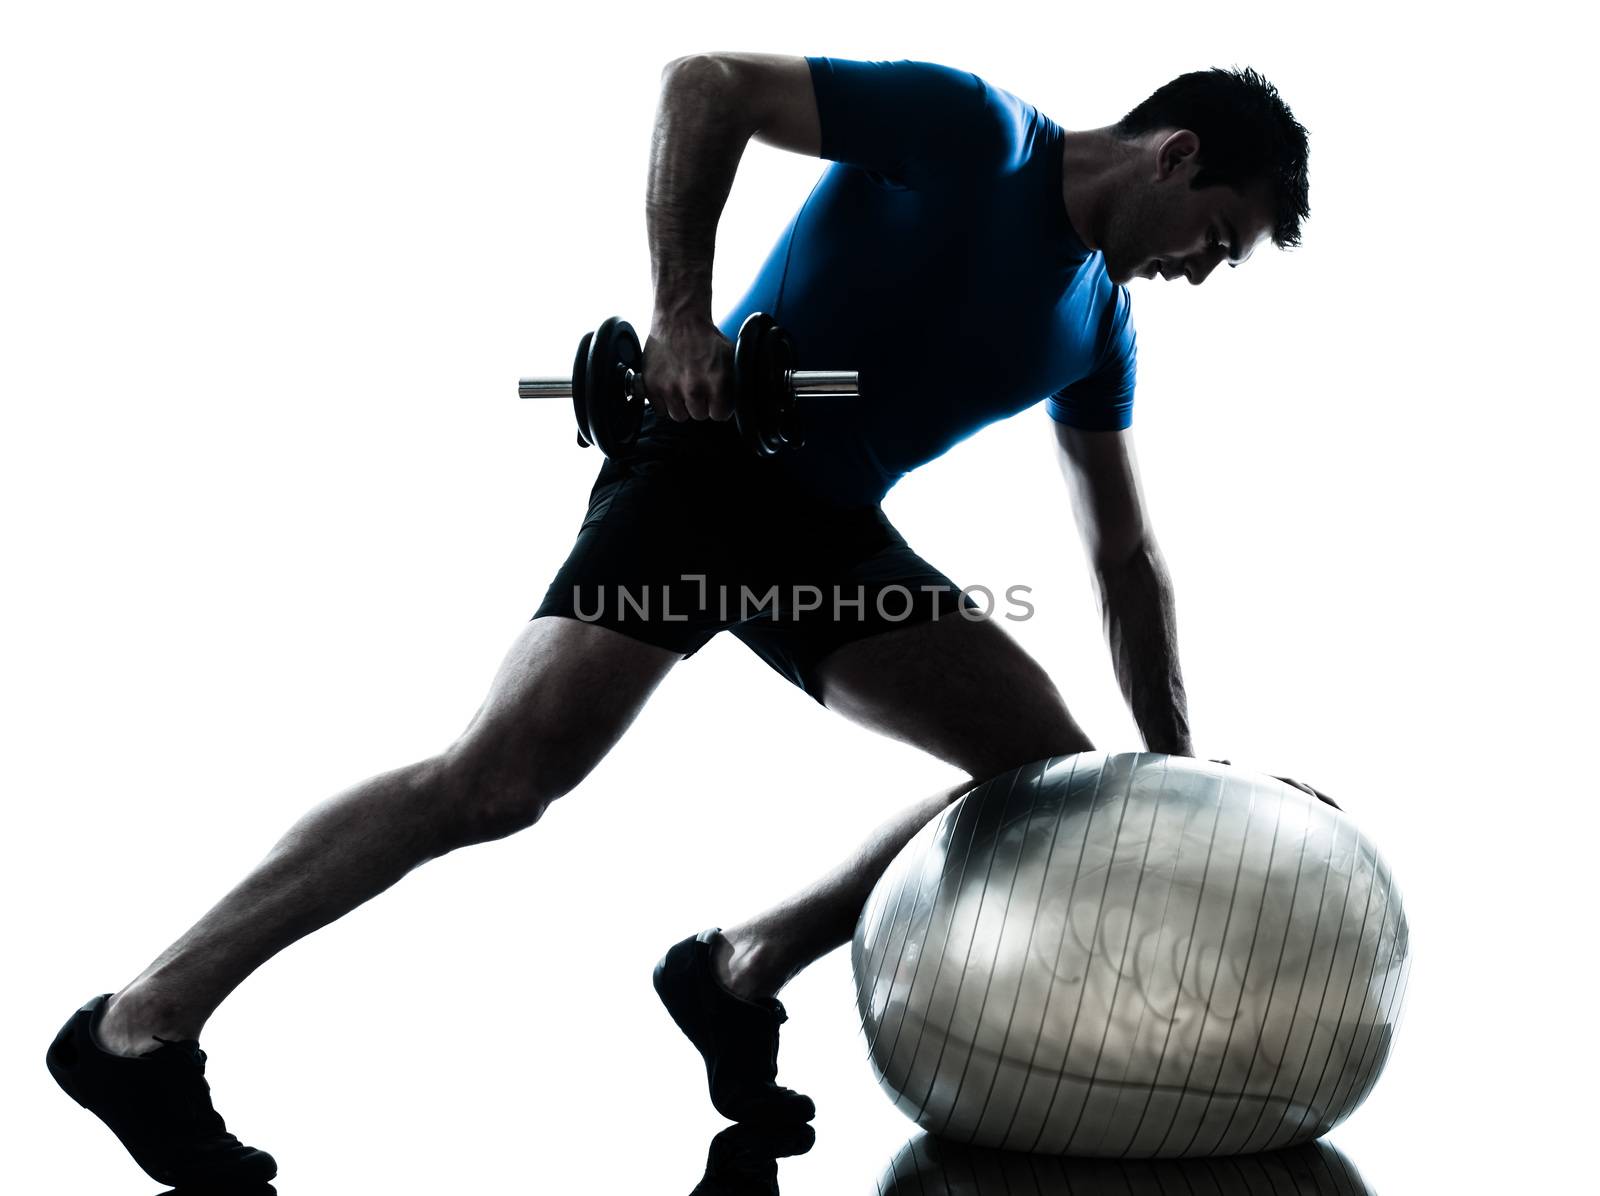 one caucasian man exercising weight training workout fitness in silhouette studio  isolated on white background